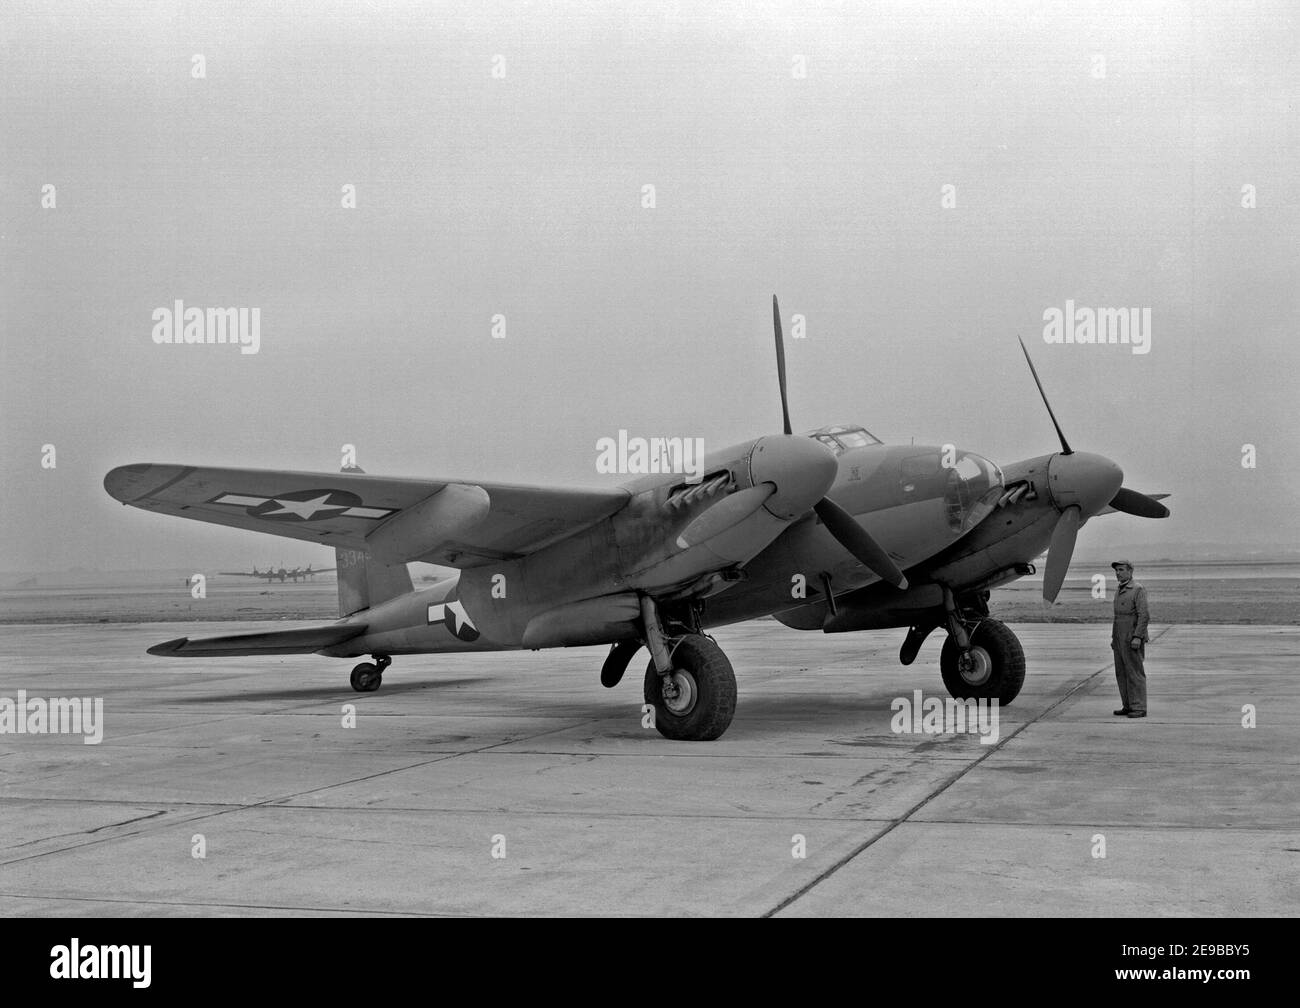 A U.S. Army Air Force De Havilland Canada Mosquito which was flown at the U.S. National Advisory Committee for Aeronautics (NACA) Langley Research Center, Virginia (USA), by test pilot Bill Gray during longitudinal stability and control studies of the aircraft in 1945. This aircraft was originally a Mosquito B Mk XX, the Canadian version of the Mosquito B Mk IV bomber aircraft. 145 were built, of which 40 were converted into photo-reconnaissance aircraft for the USAAF, which designated the planes F-8. 4 January 1945 Stock Photo